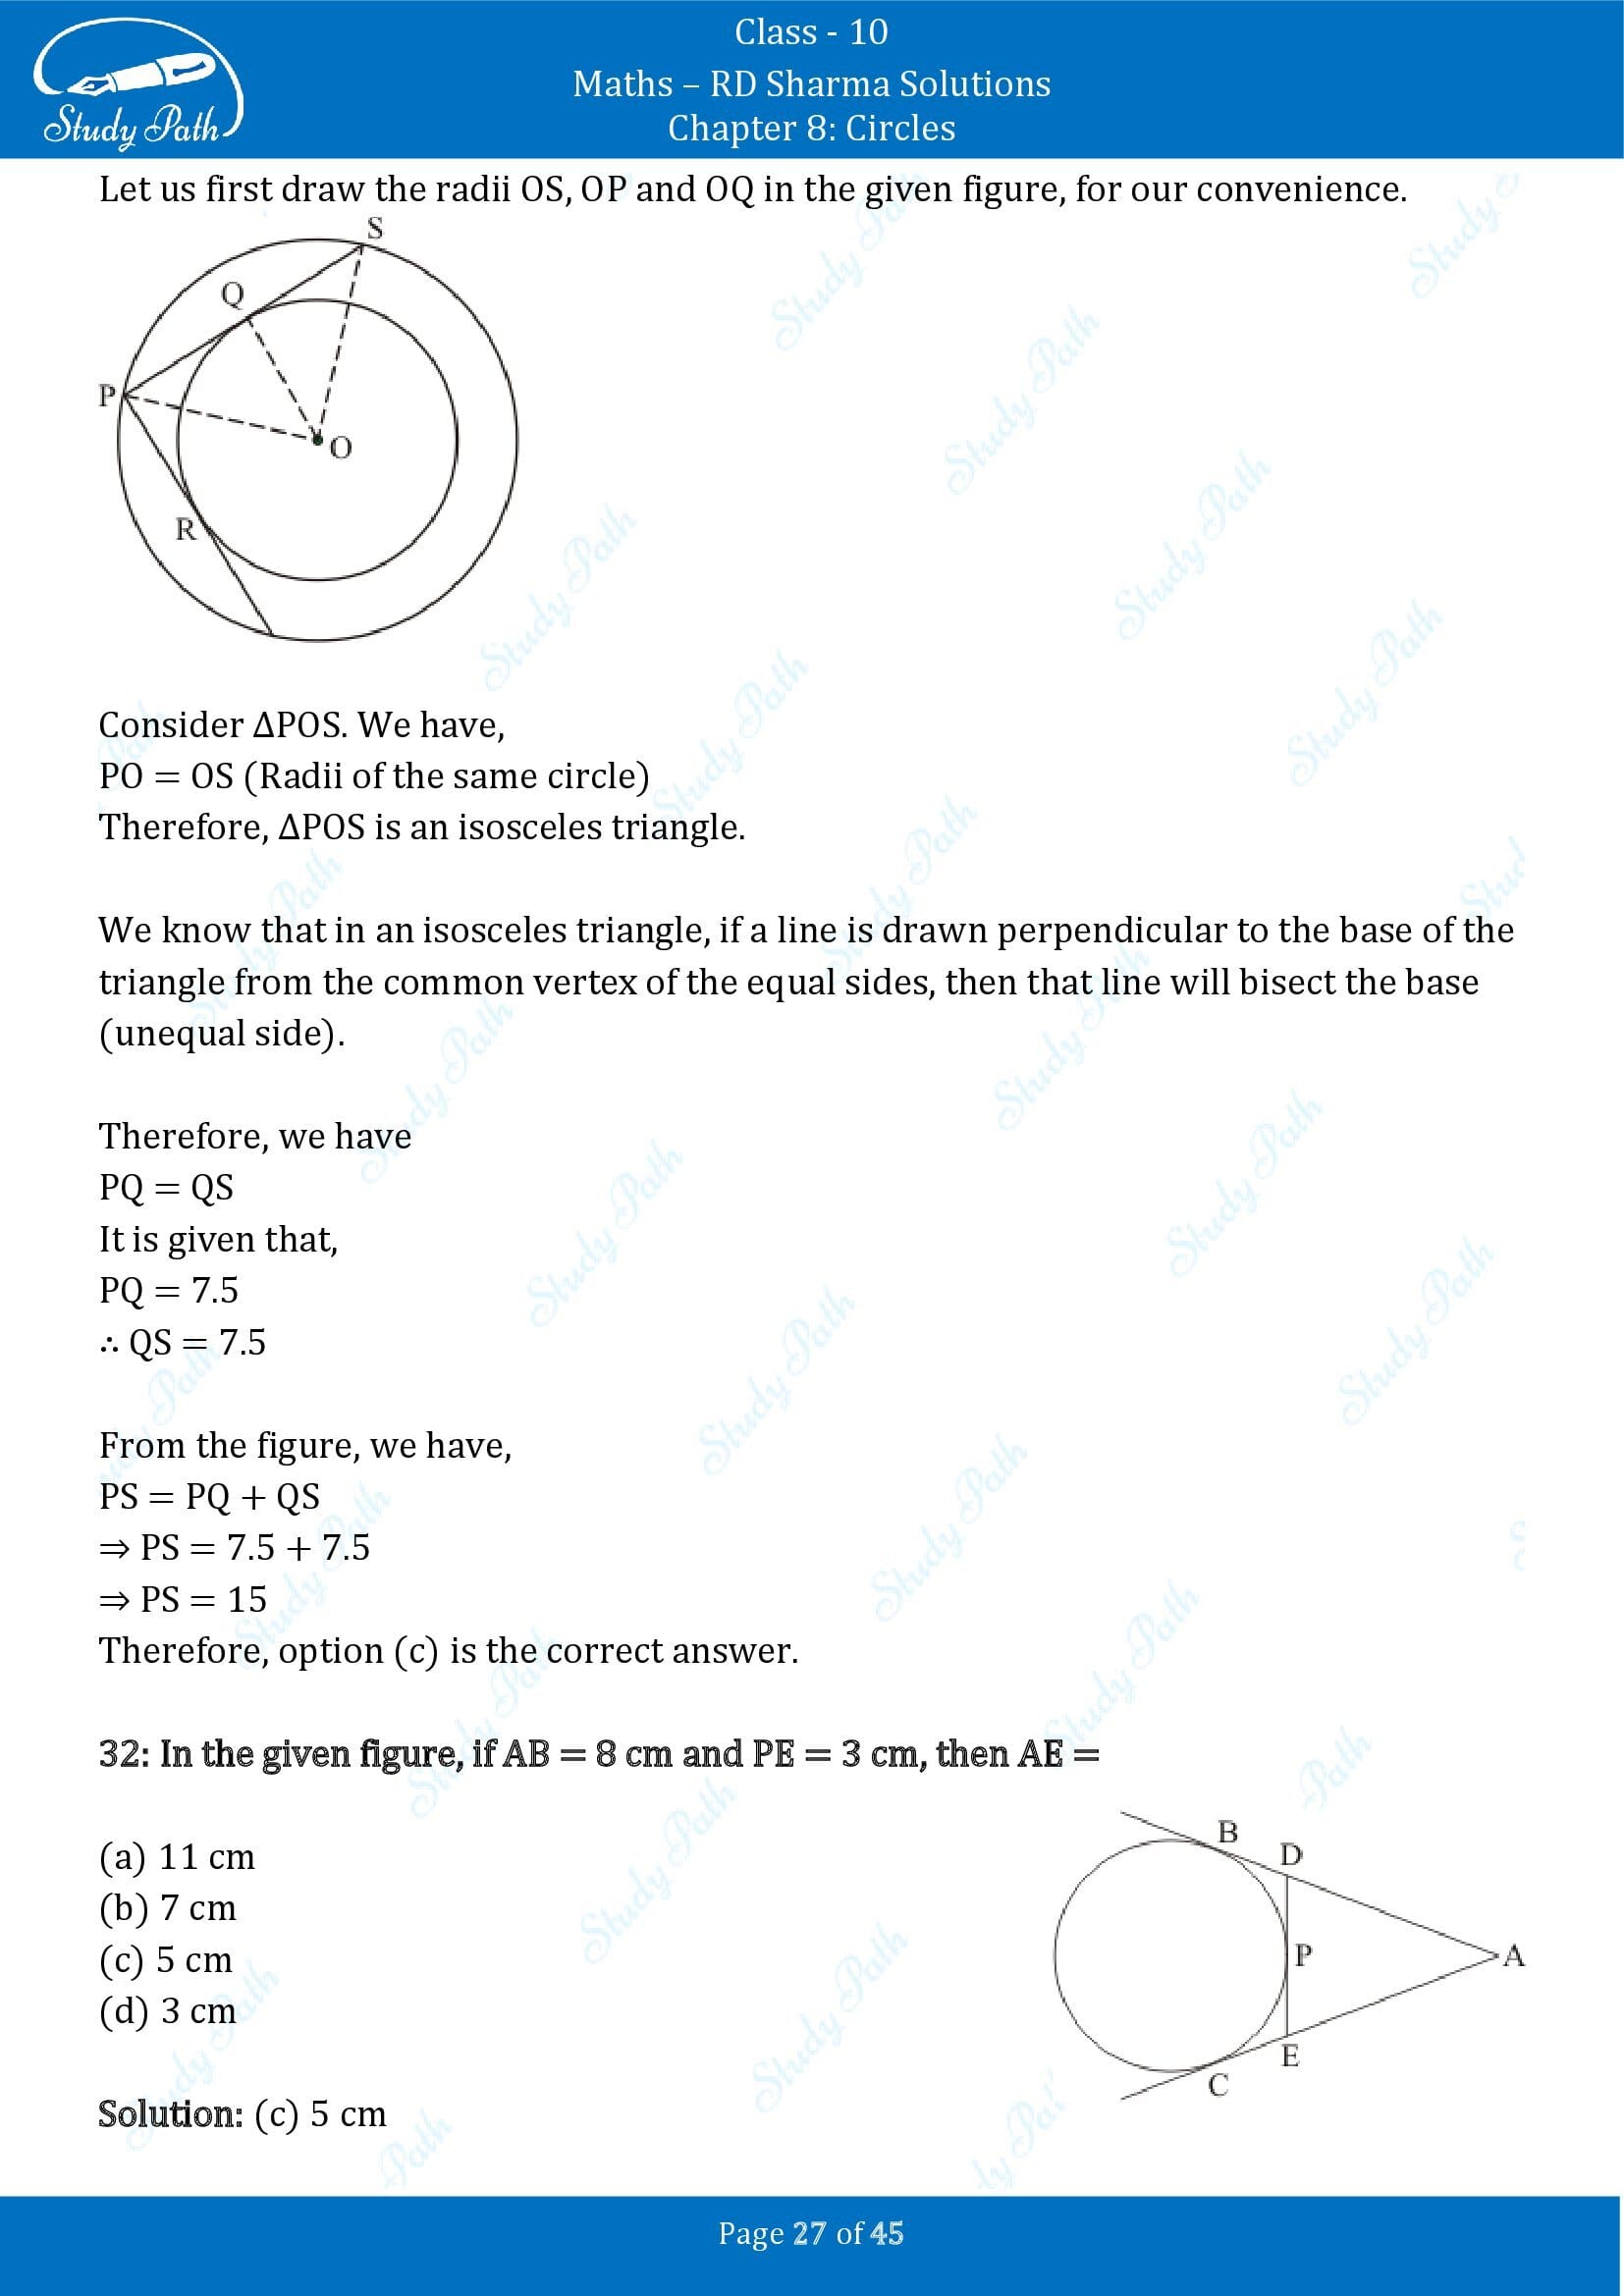 RD Sharma Solutions Class 10 Chapter 8 Circles Multiple Choice Questions MCQs 00027